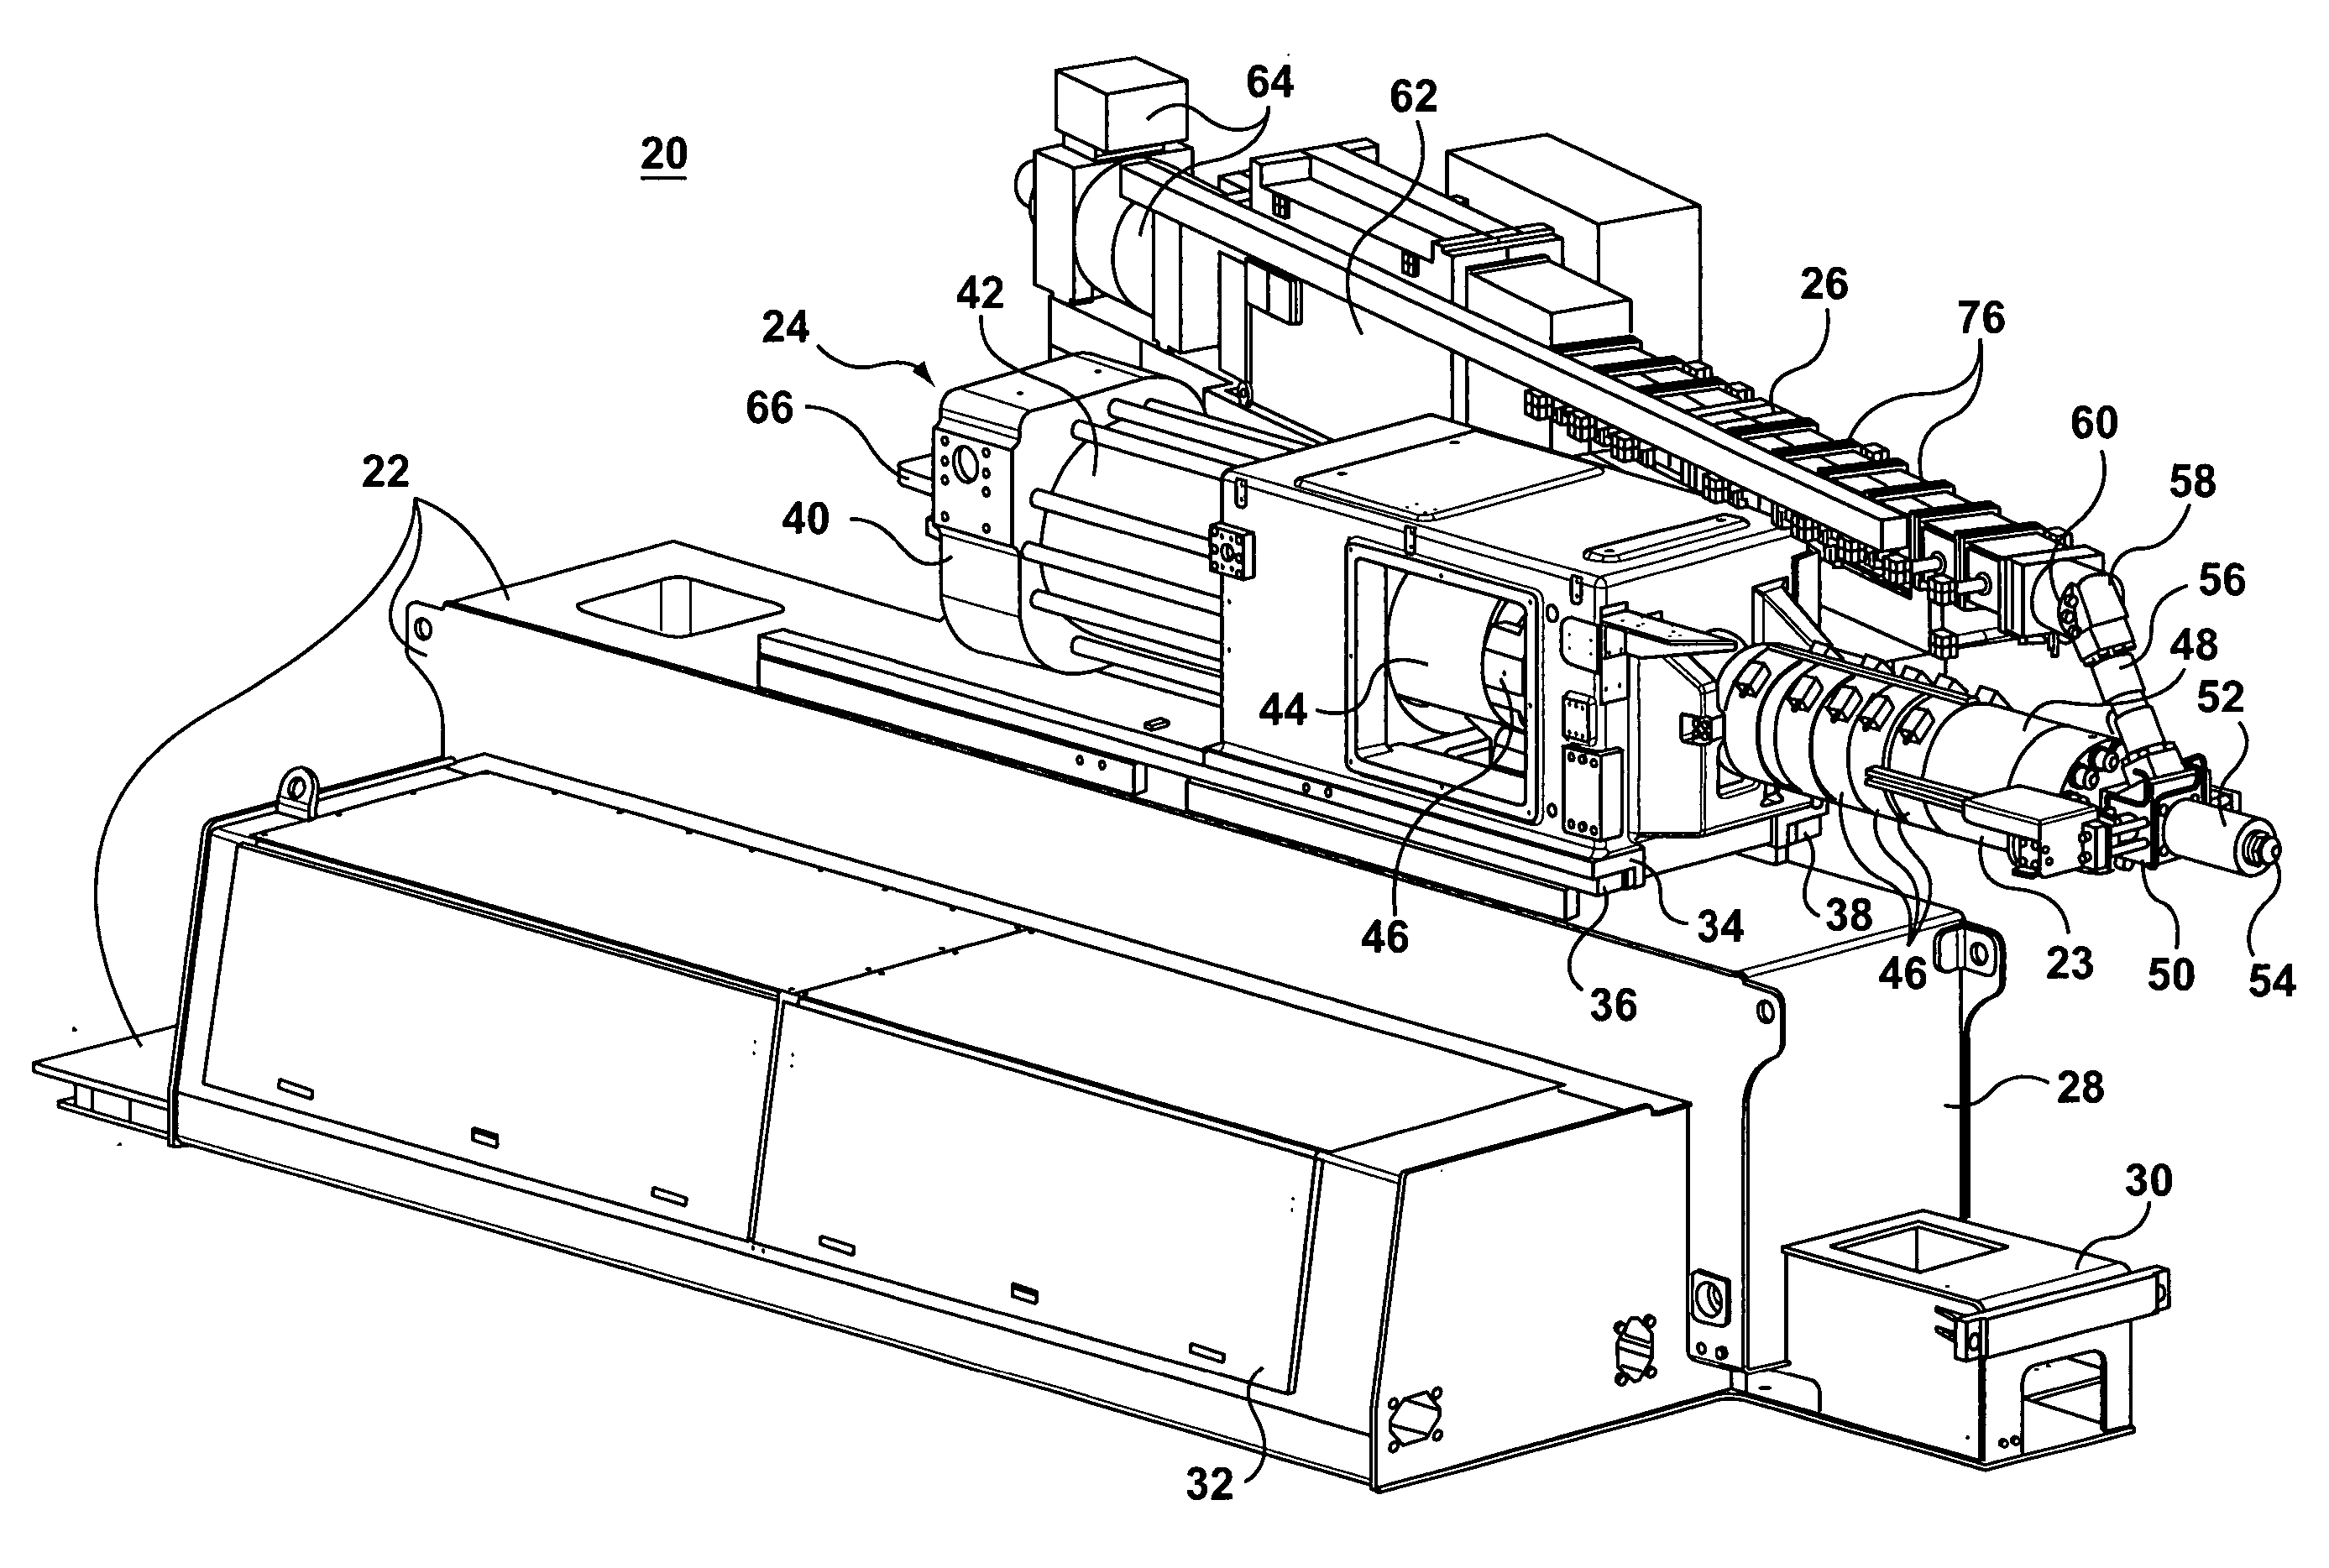 Molding machine plasticizing unit sub-assembly and a method of reducing shearing effects in the manufacture of plastic parts